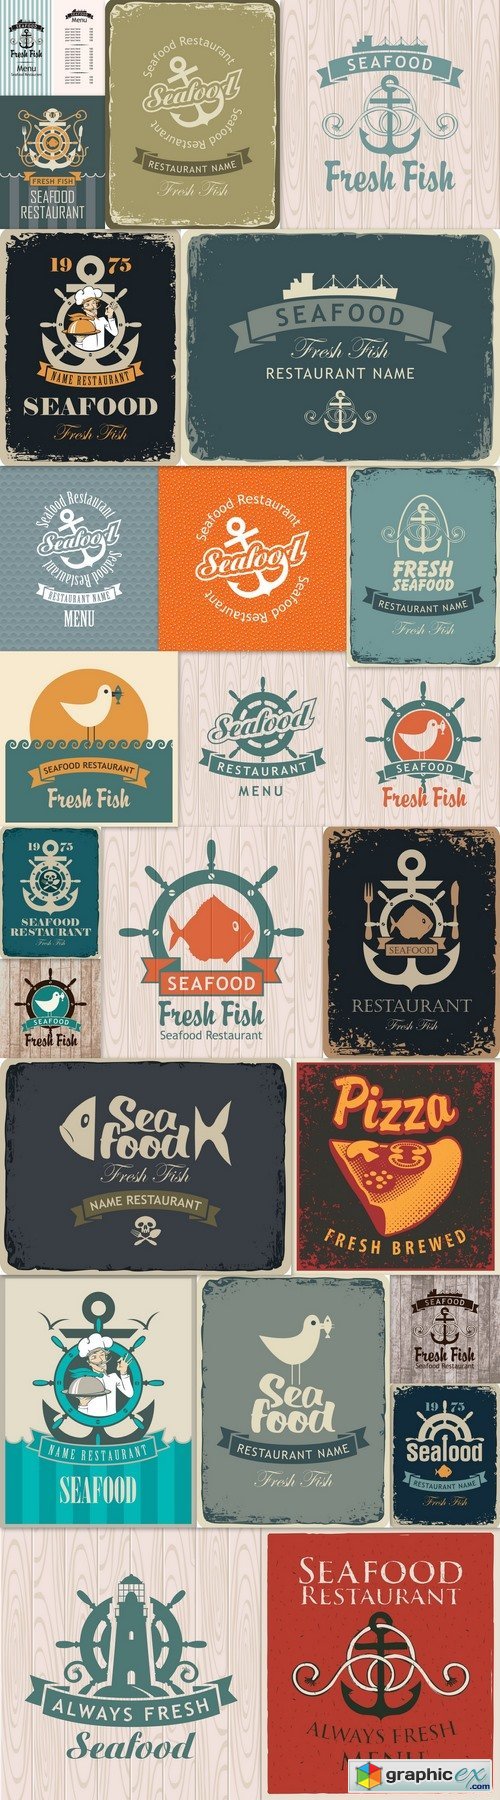 Retro banner for a seafood restaurant with an anchor